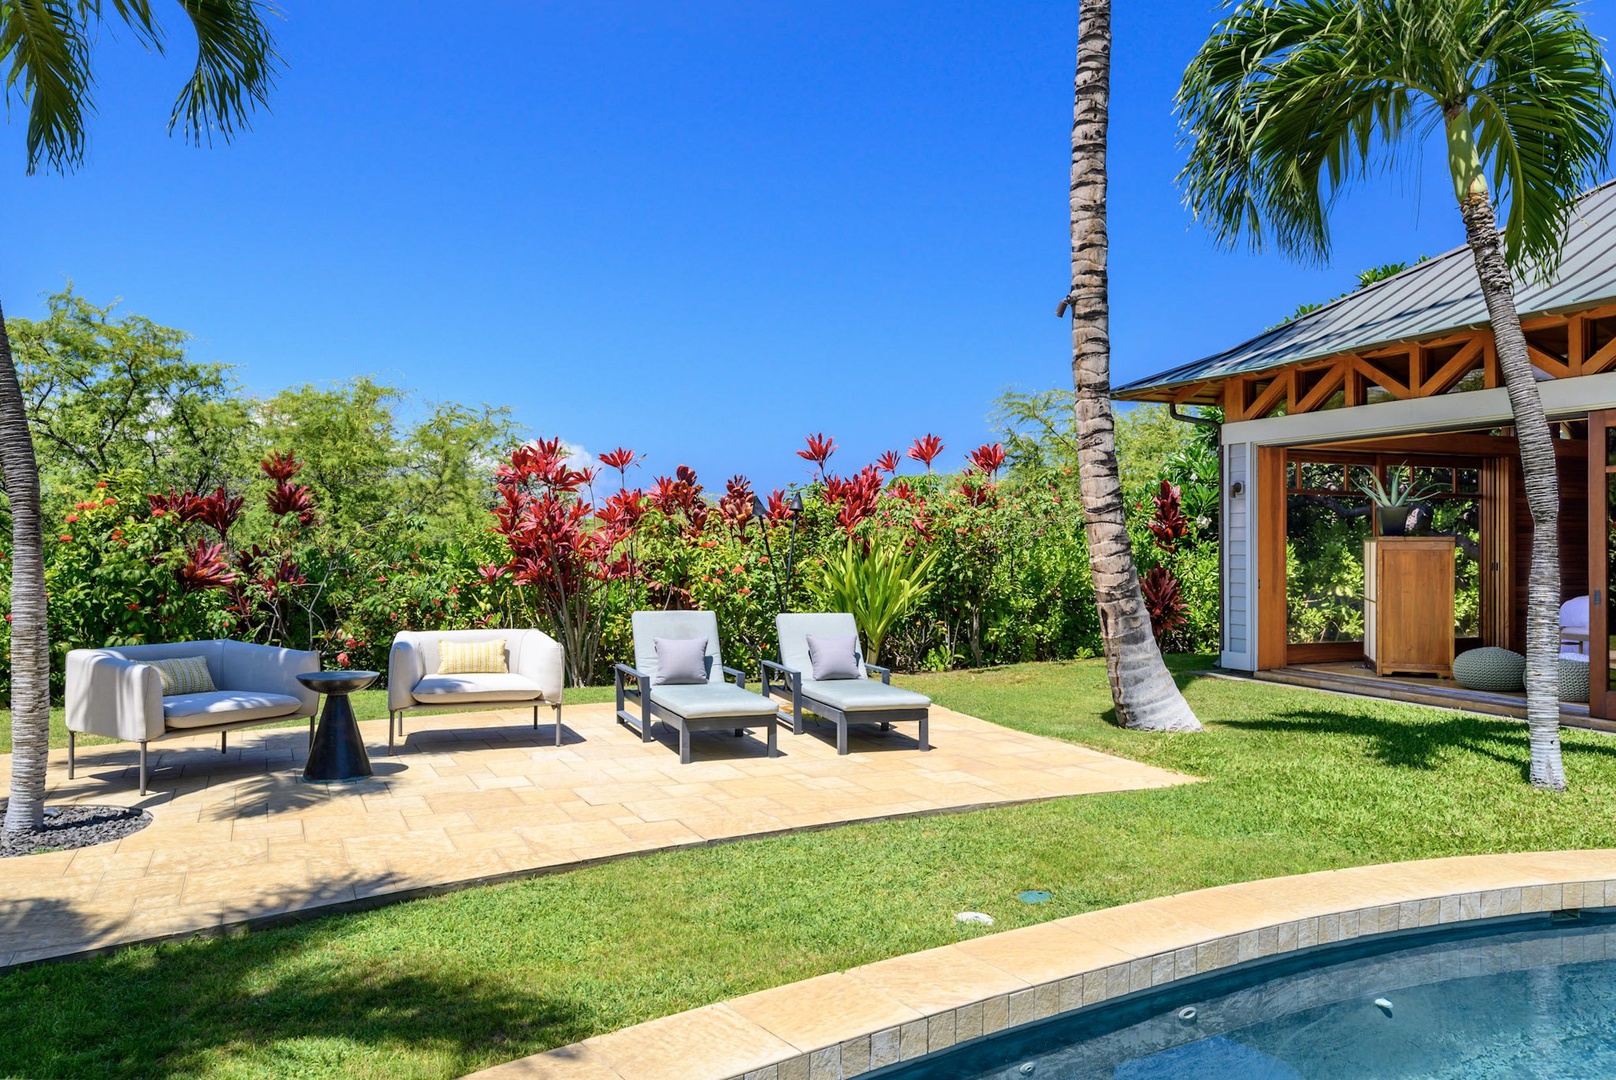 Kamuela Vacation Rentals, 3BD Na Hale 3 at Pauoa Beach Club at Mauna Lani Resort - The lounge area by the poolside is a perfect spot for a chilled drink.